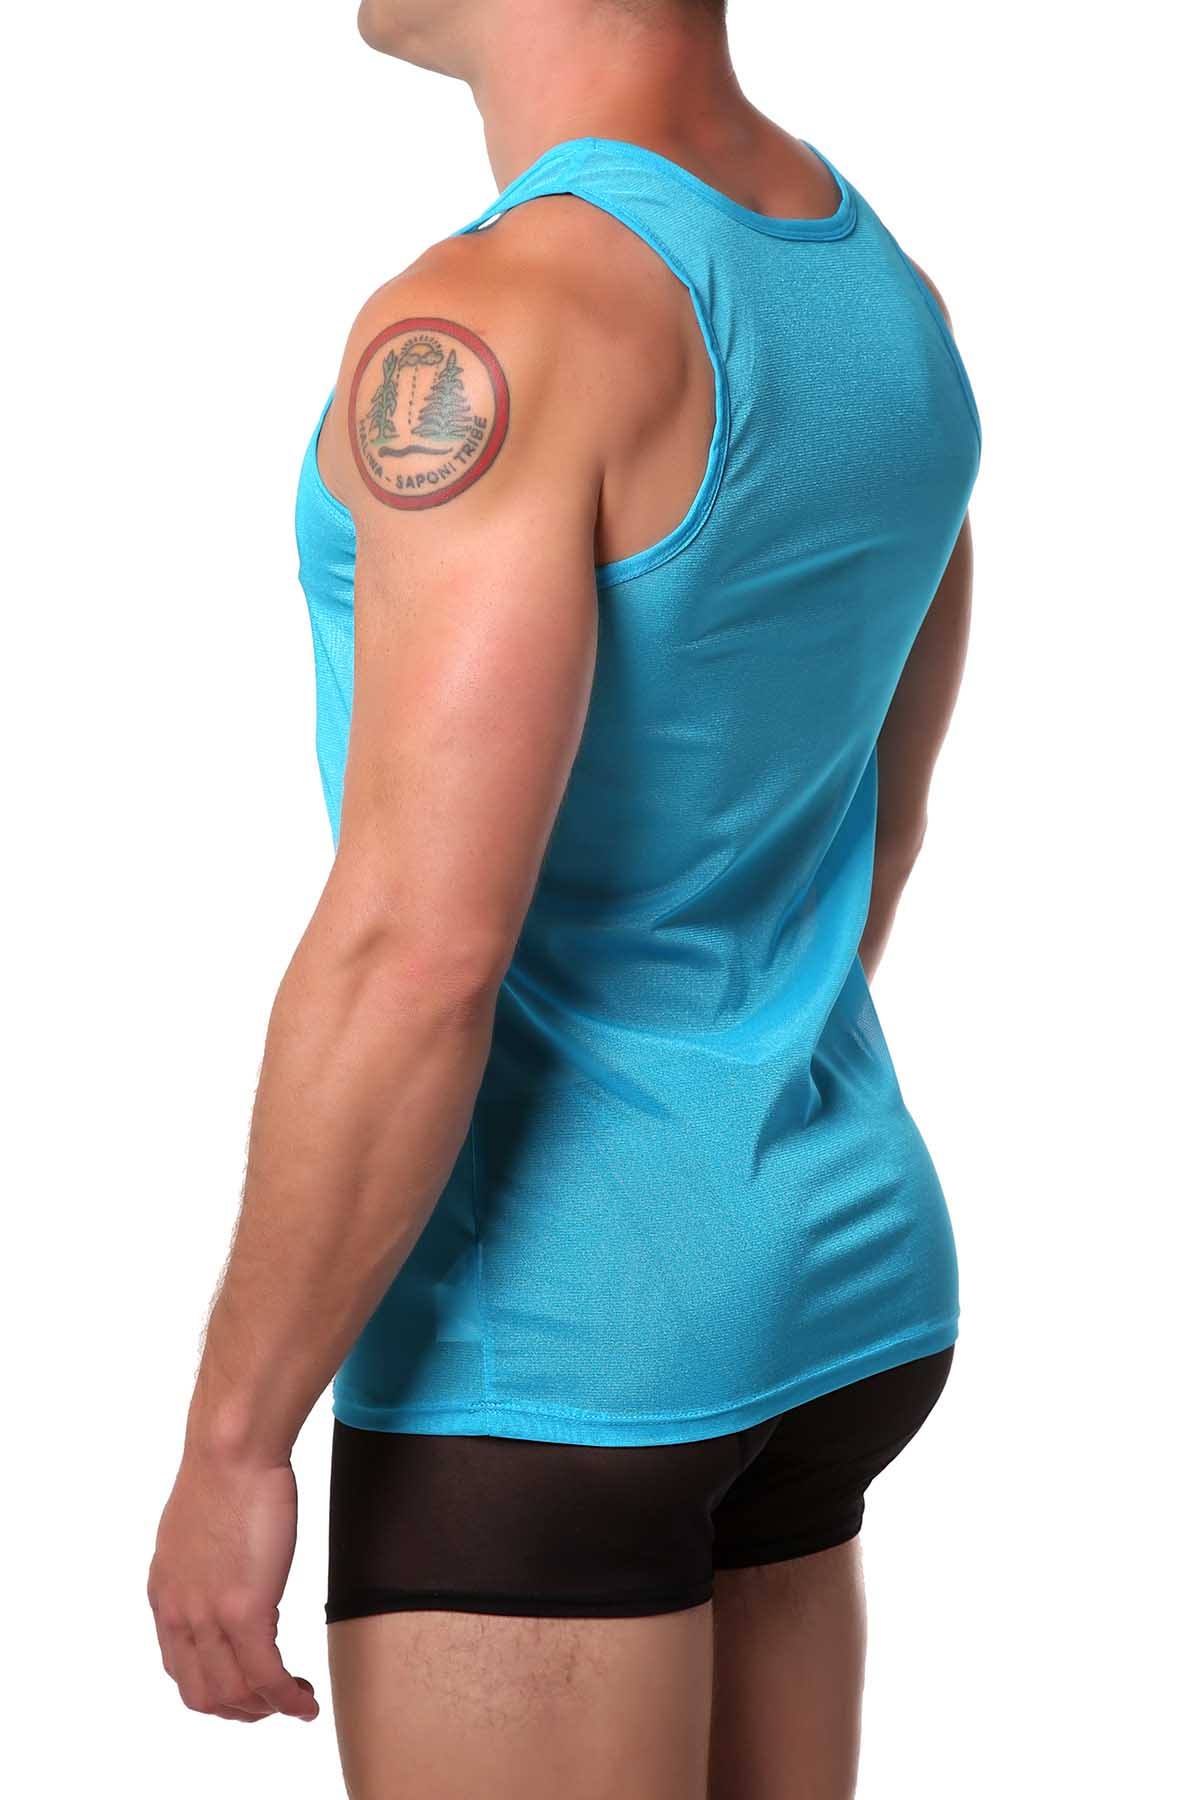 Go Softwear Turquoise 4 Play Mesh Tank Top